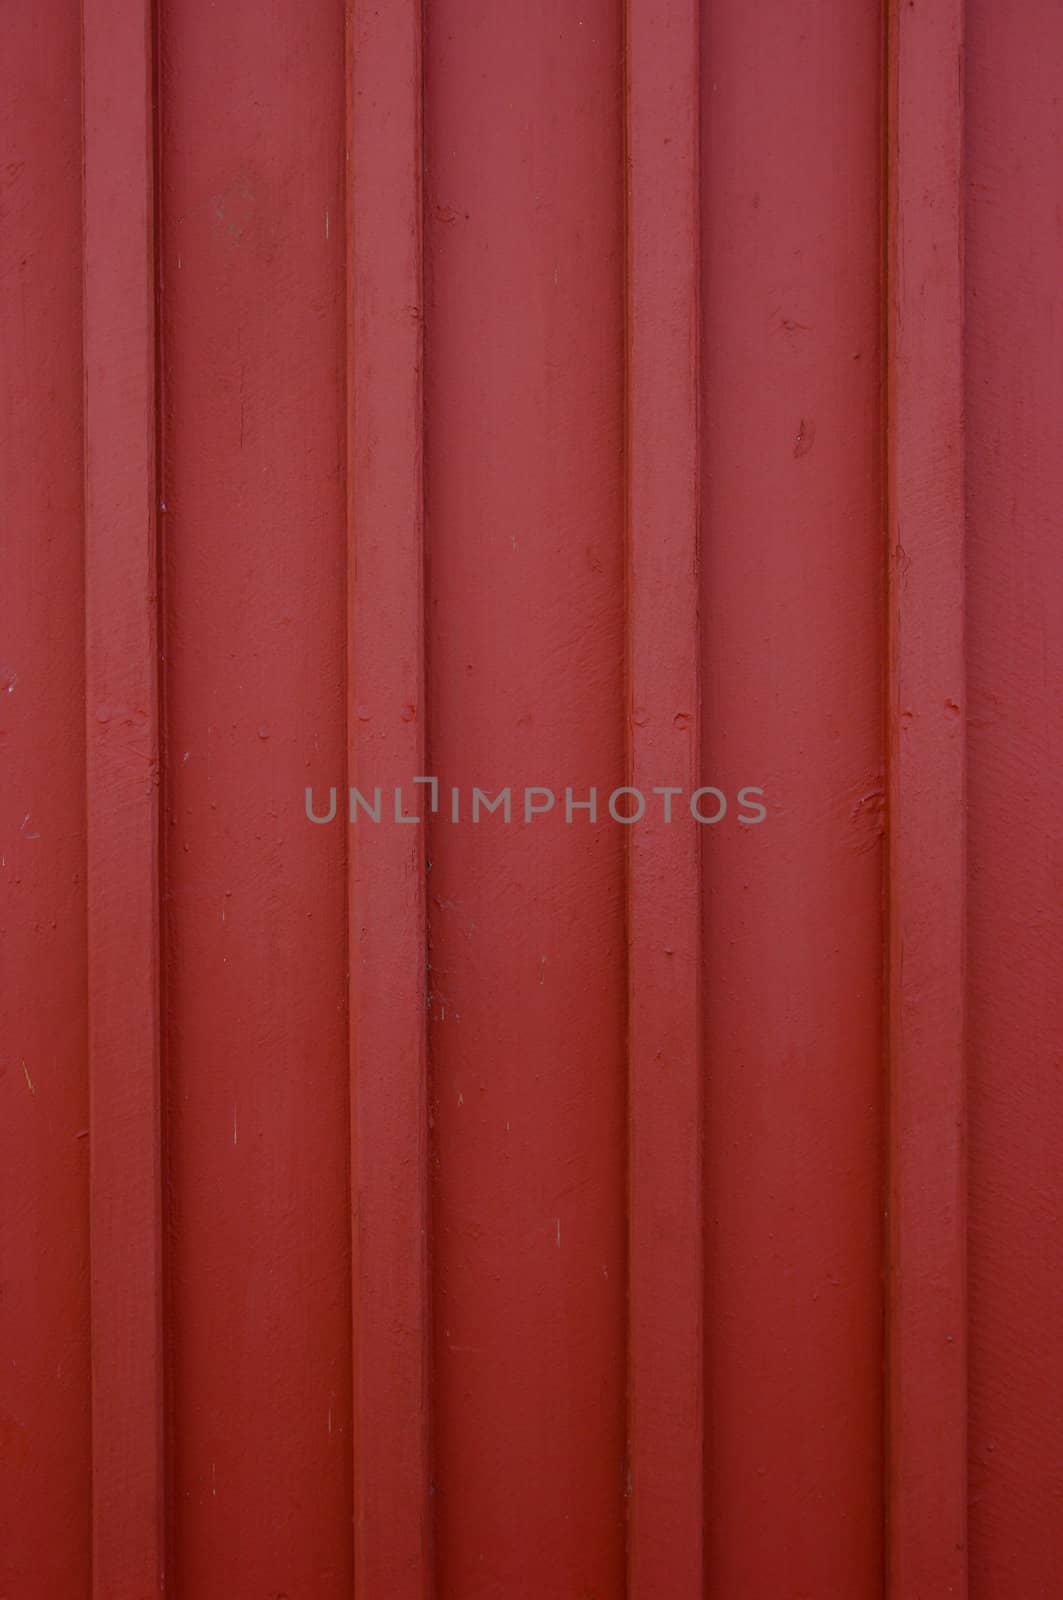 A classic red wooden wall.